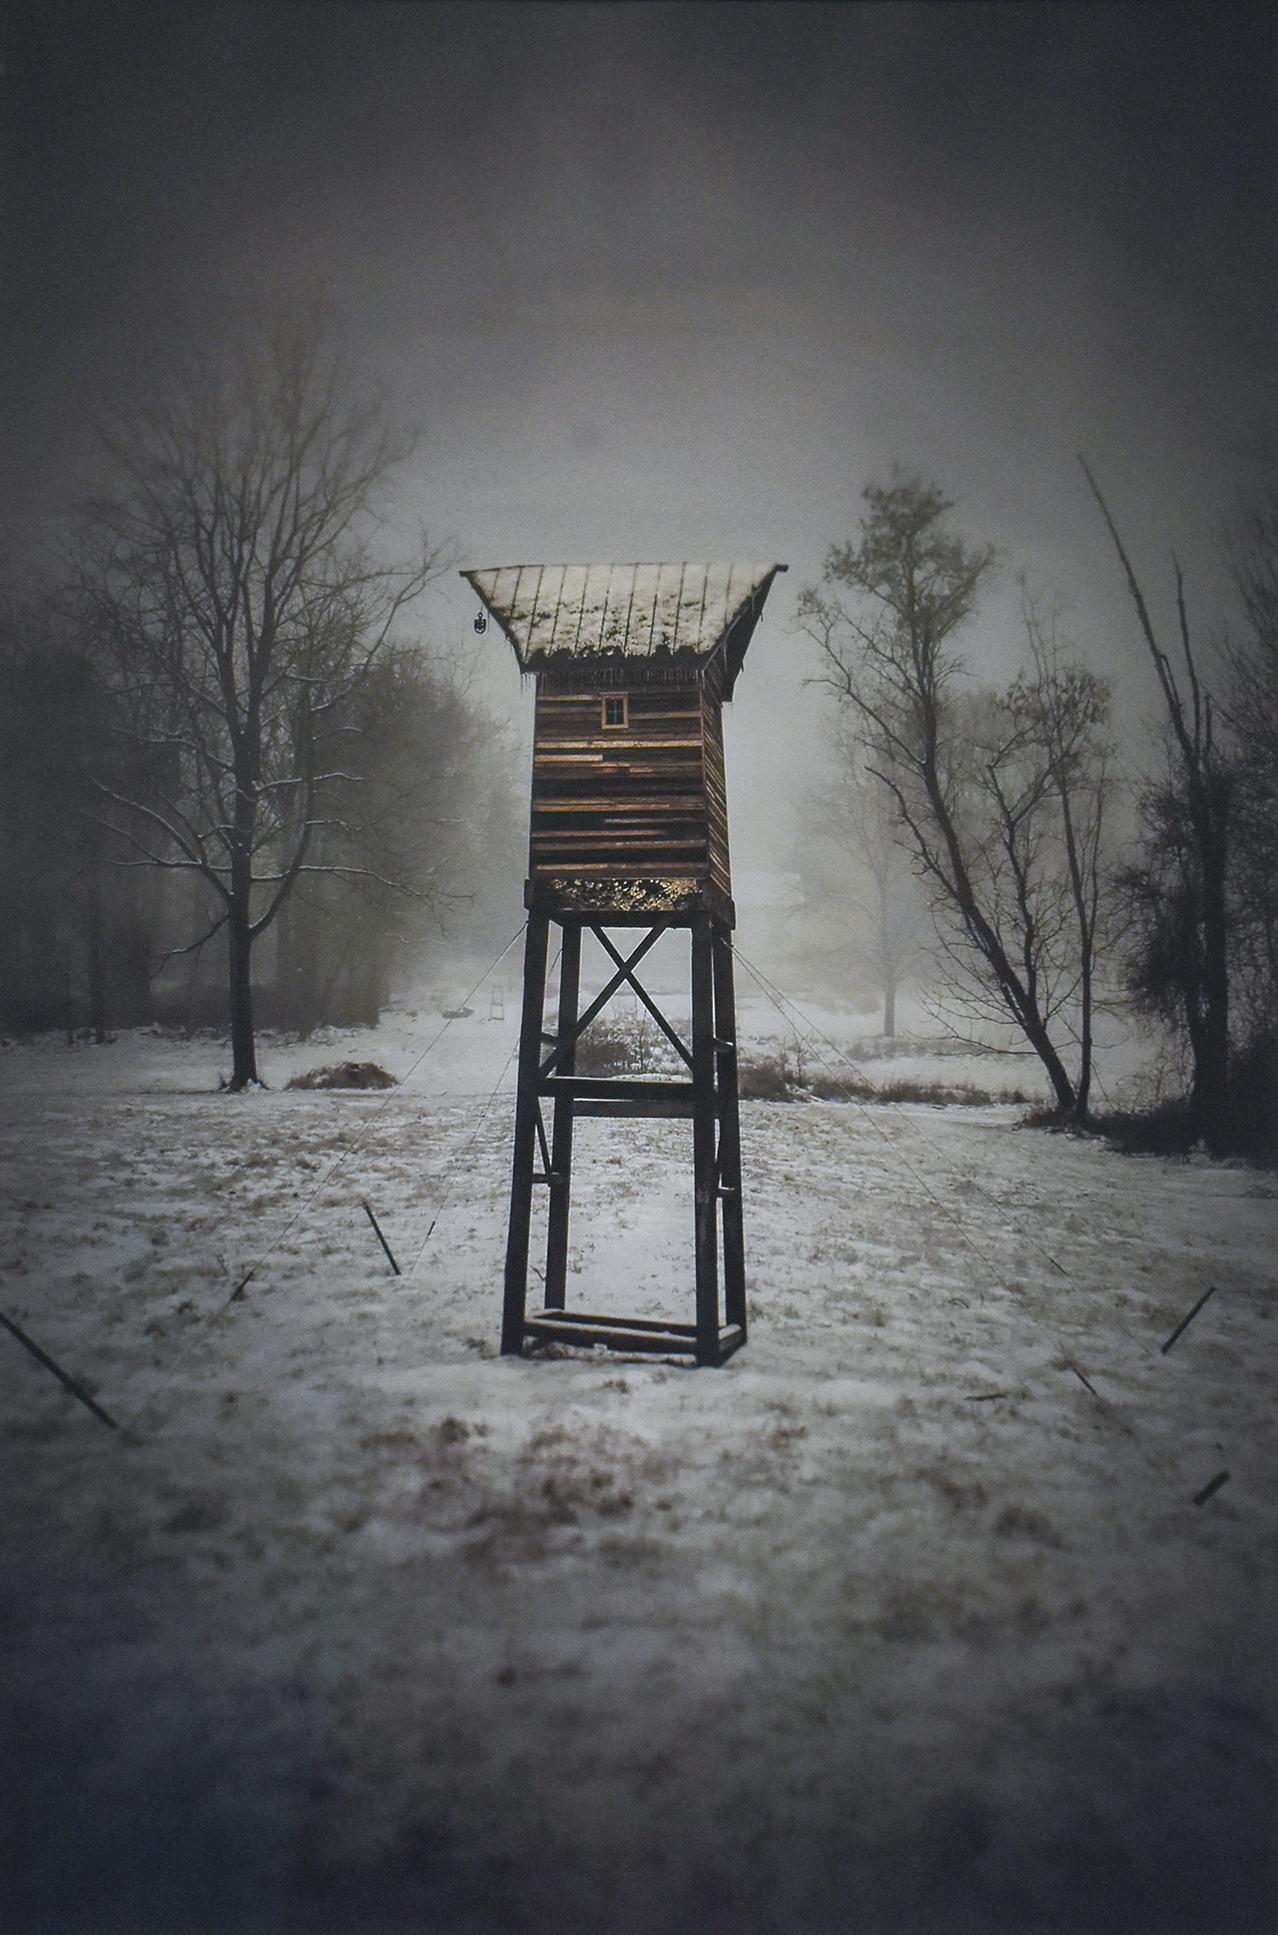 Robert Hite Black and White Photograph - Watch Tower (Contemporary Black & White Landscape Photo of Structure in Woods)